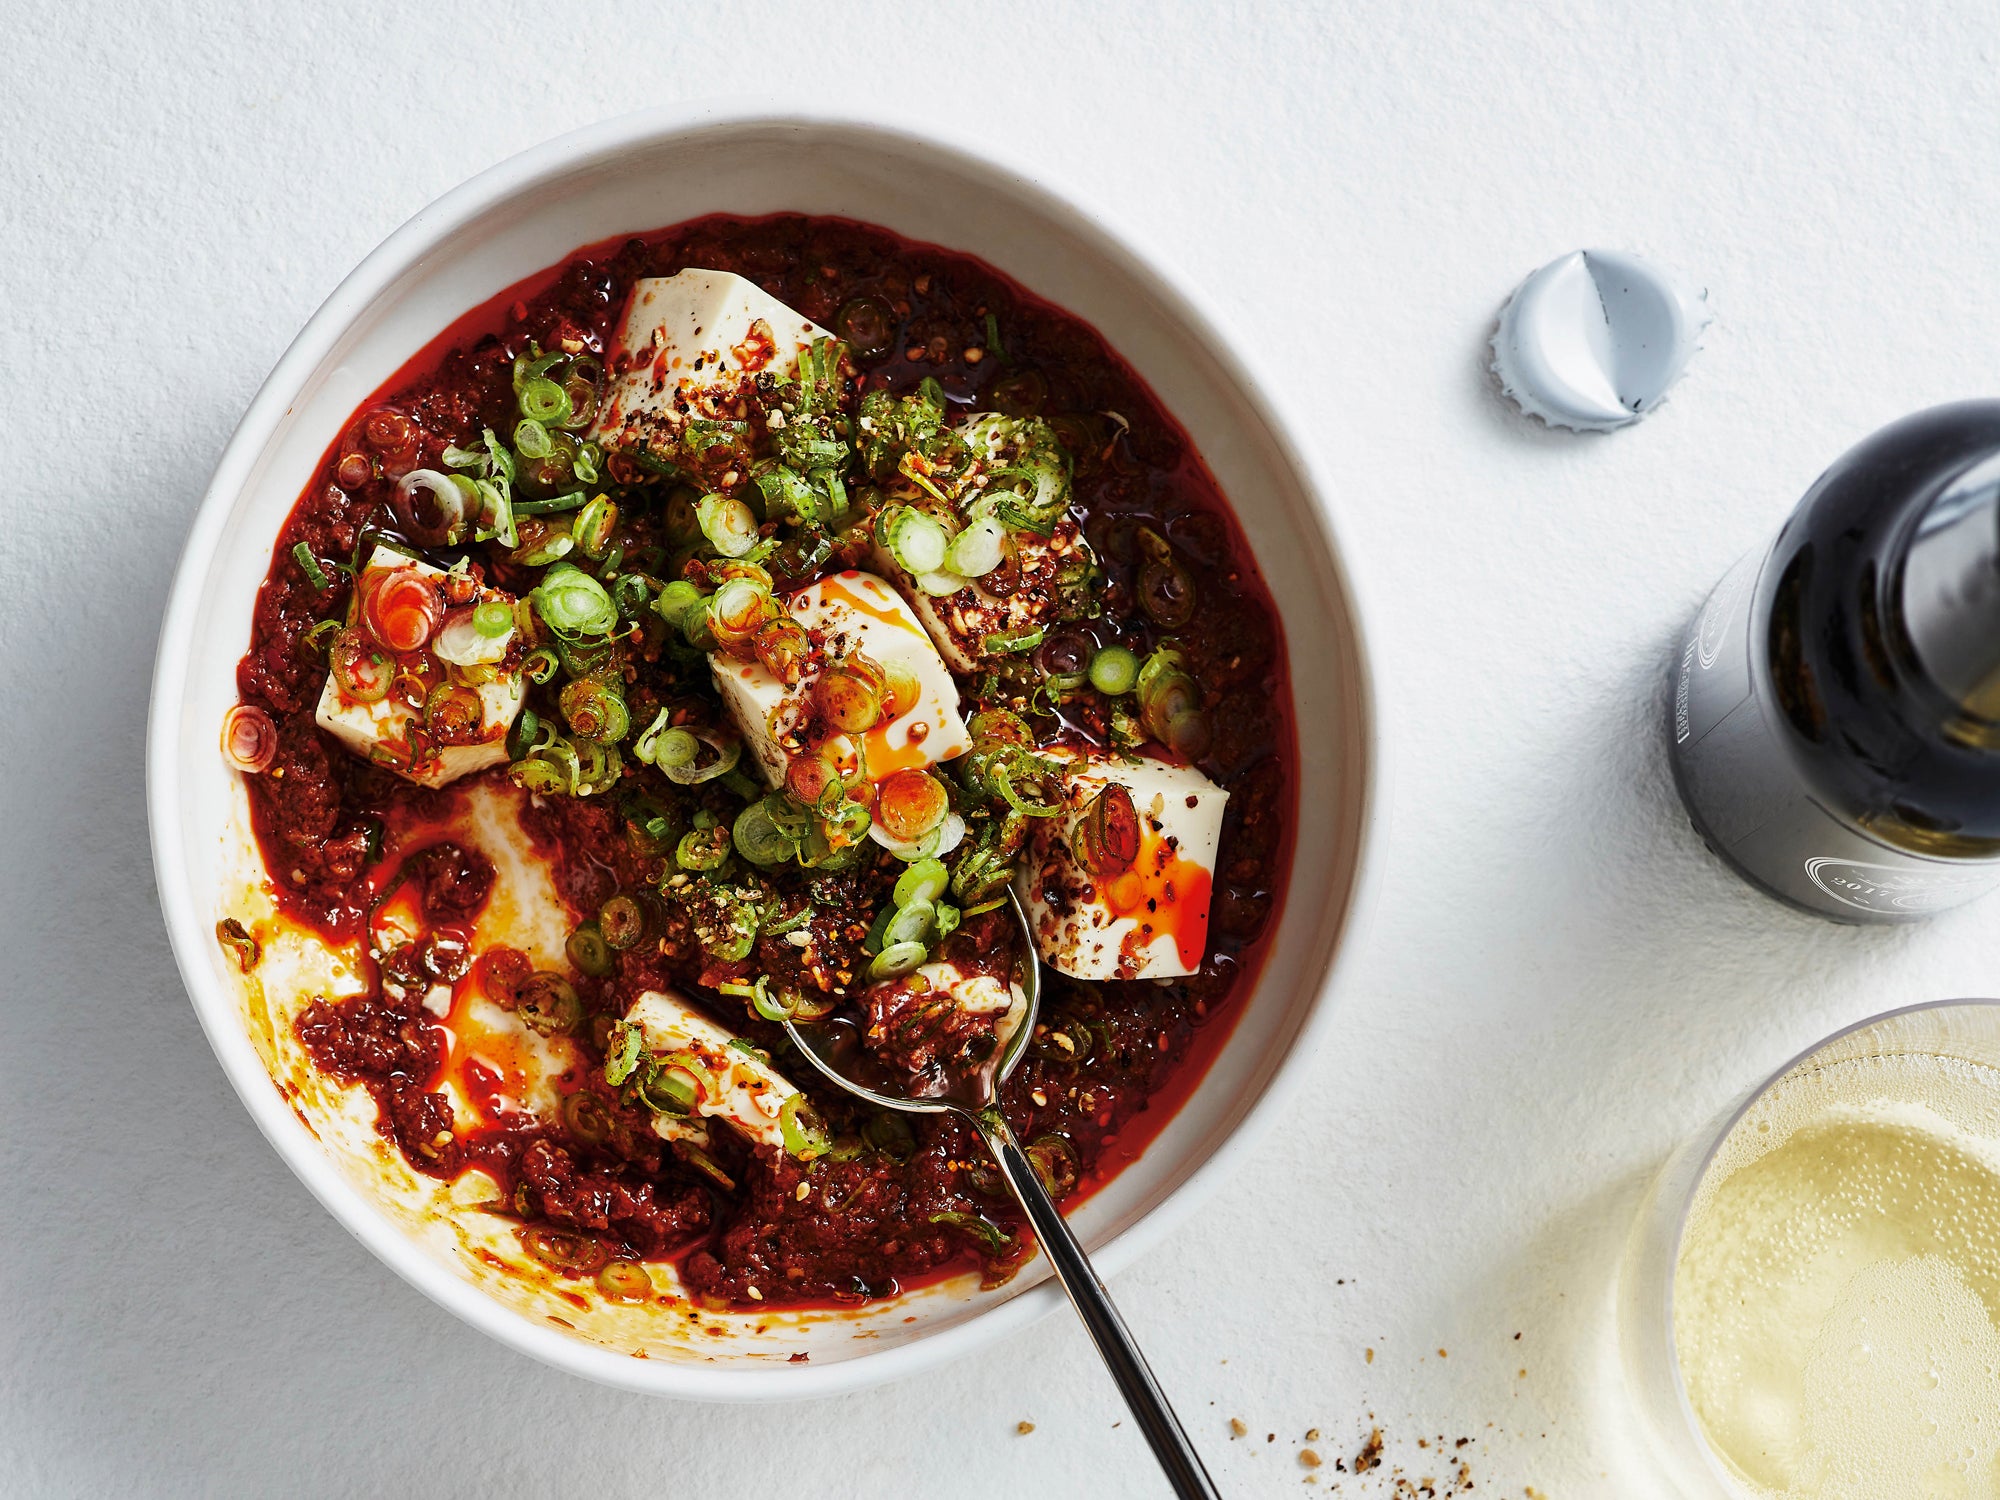 Spicy, rich and creamy: the perfect combination for a weeknight warmer